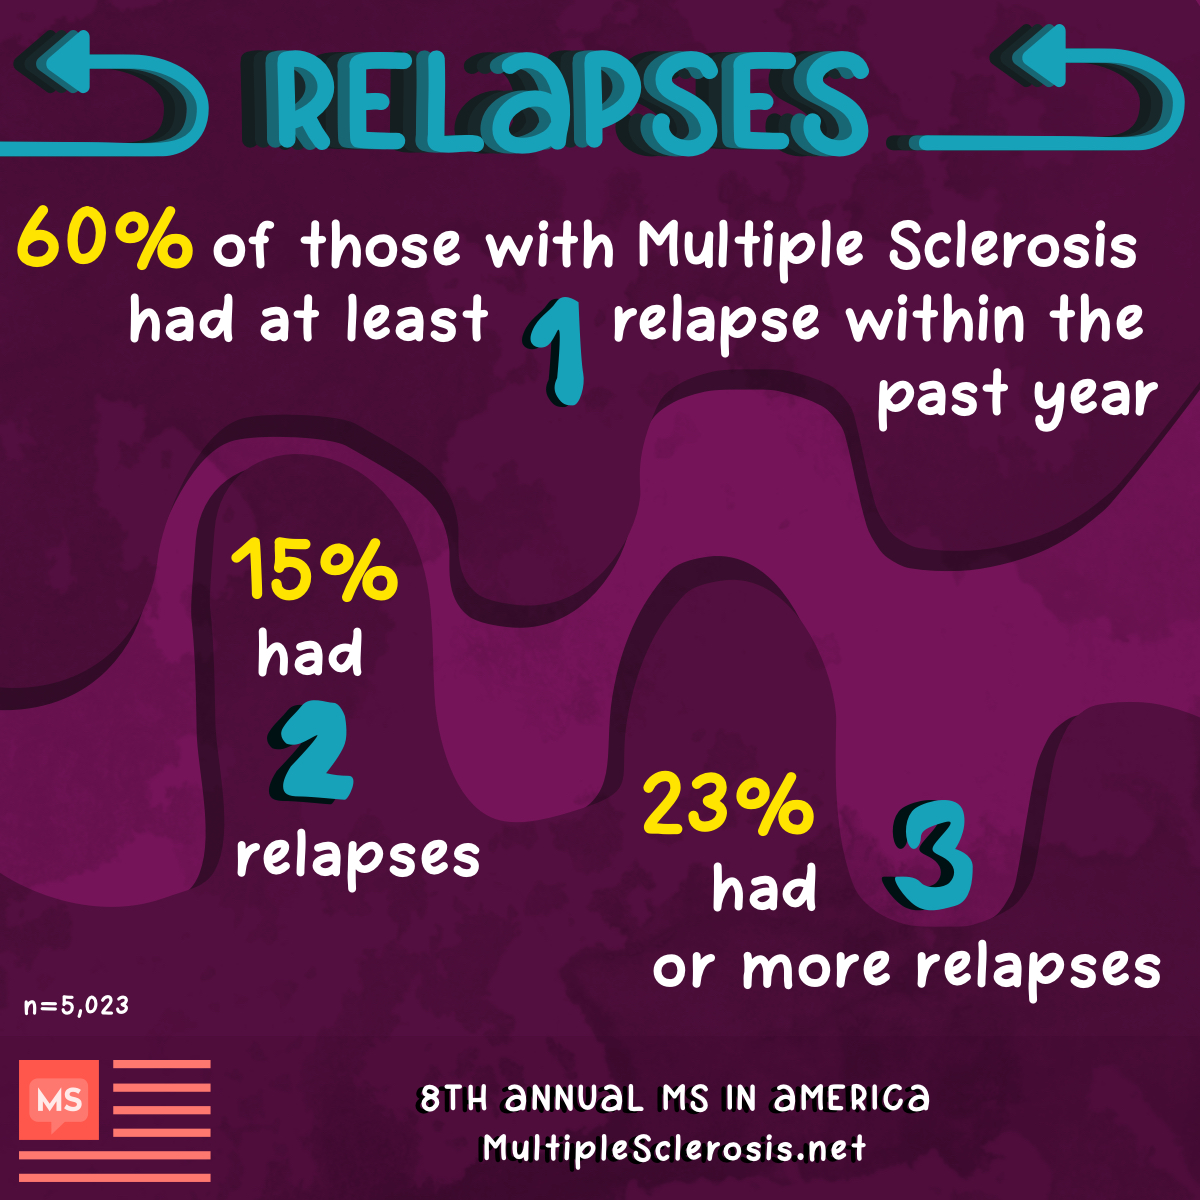 60 percent of those with MS had at least 1 years in the past year, and 23 percent had 3 or more relapses.